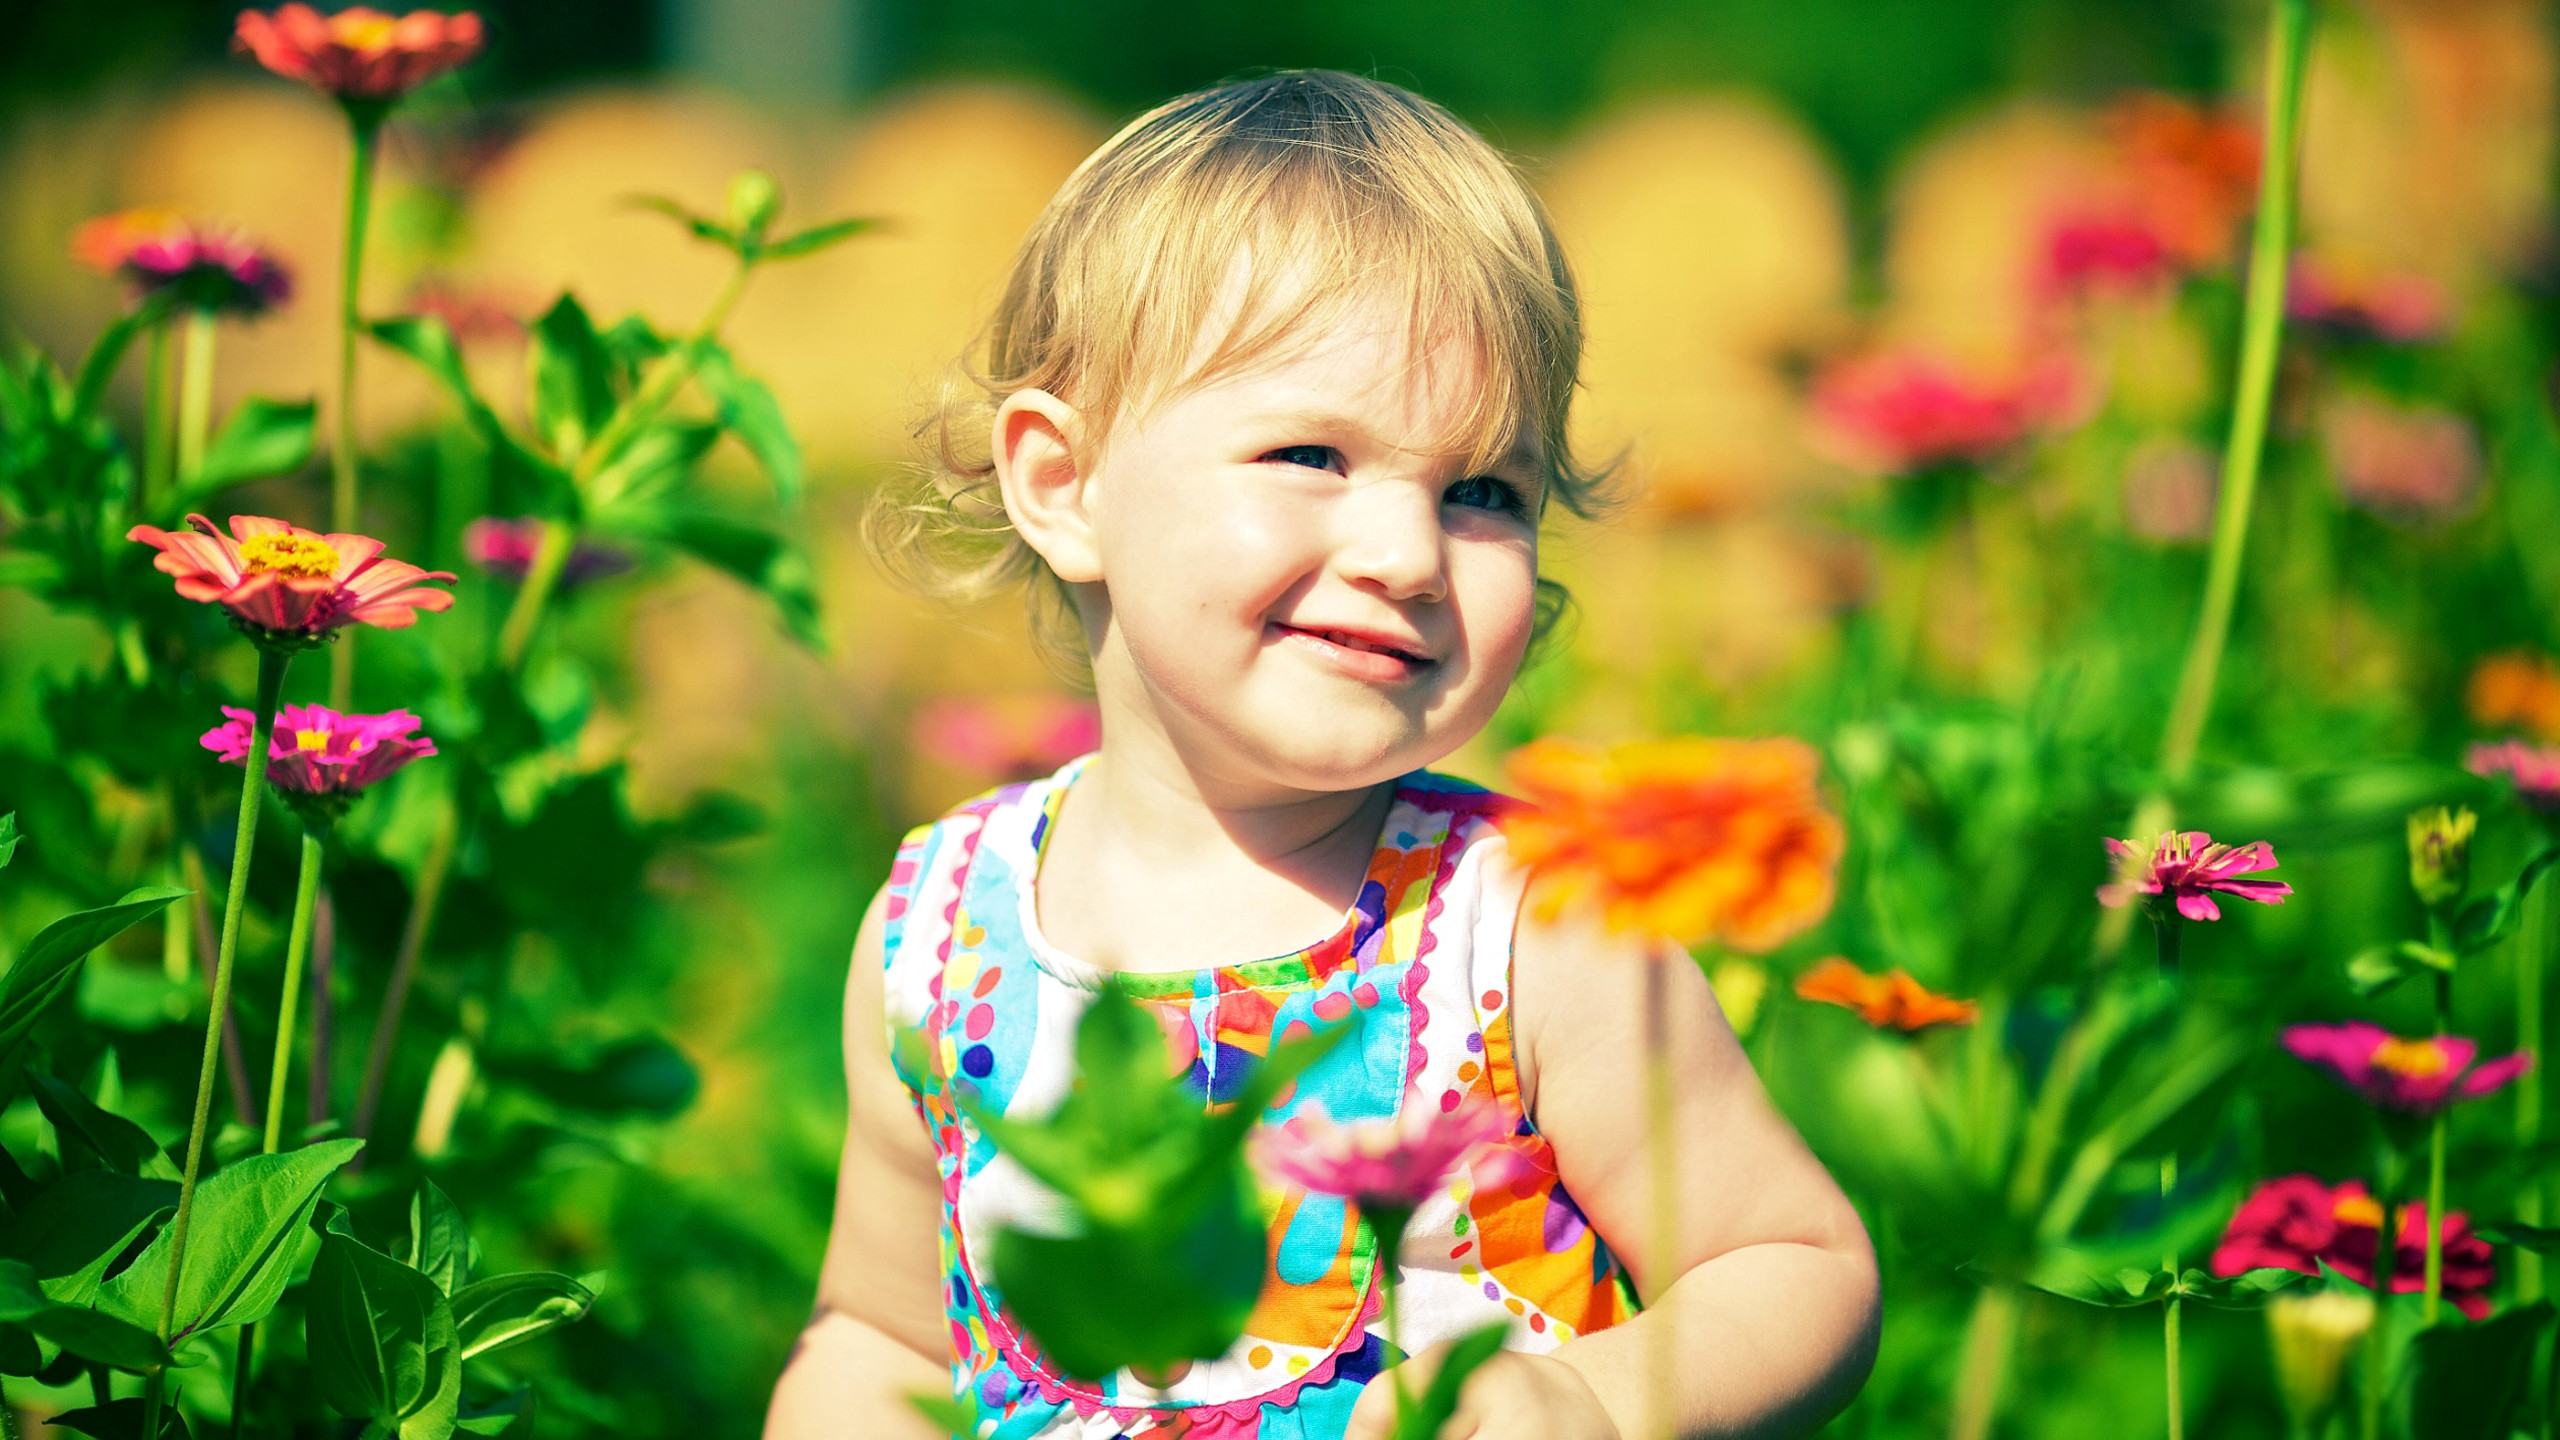 2560x1440 Cute child HD wallpapers for desktop free download